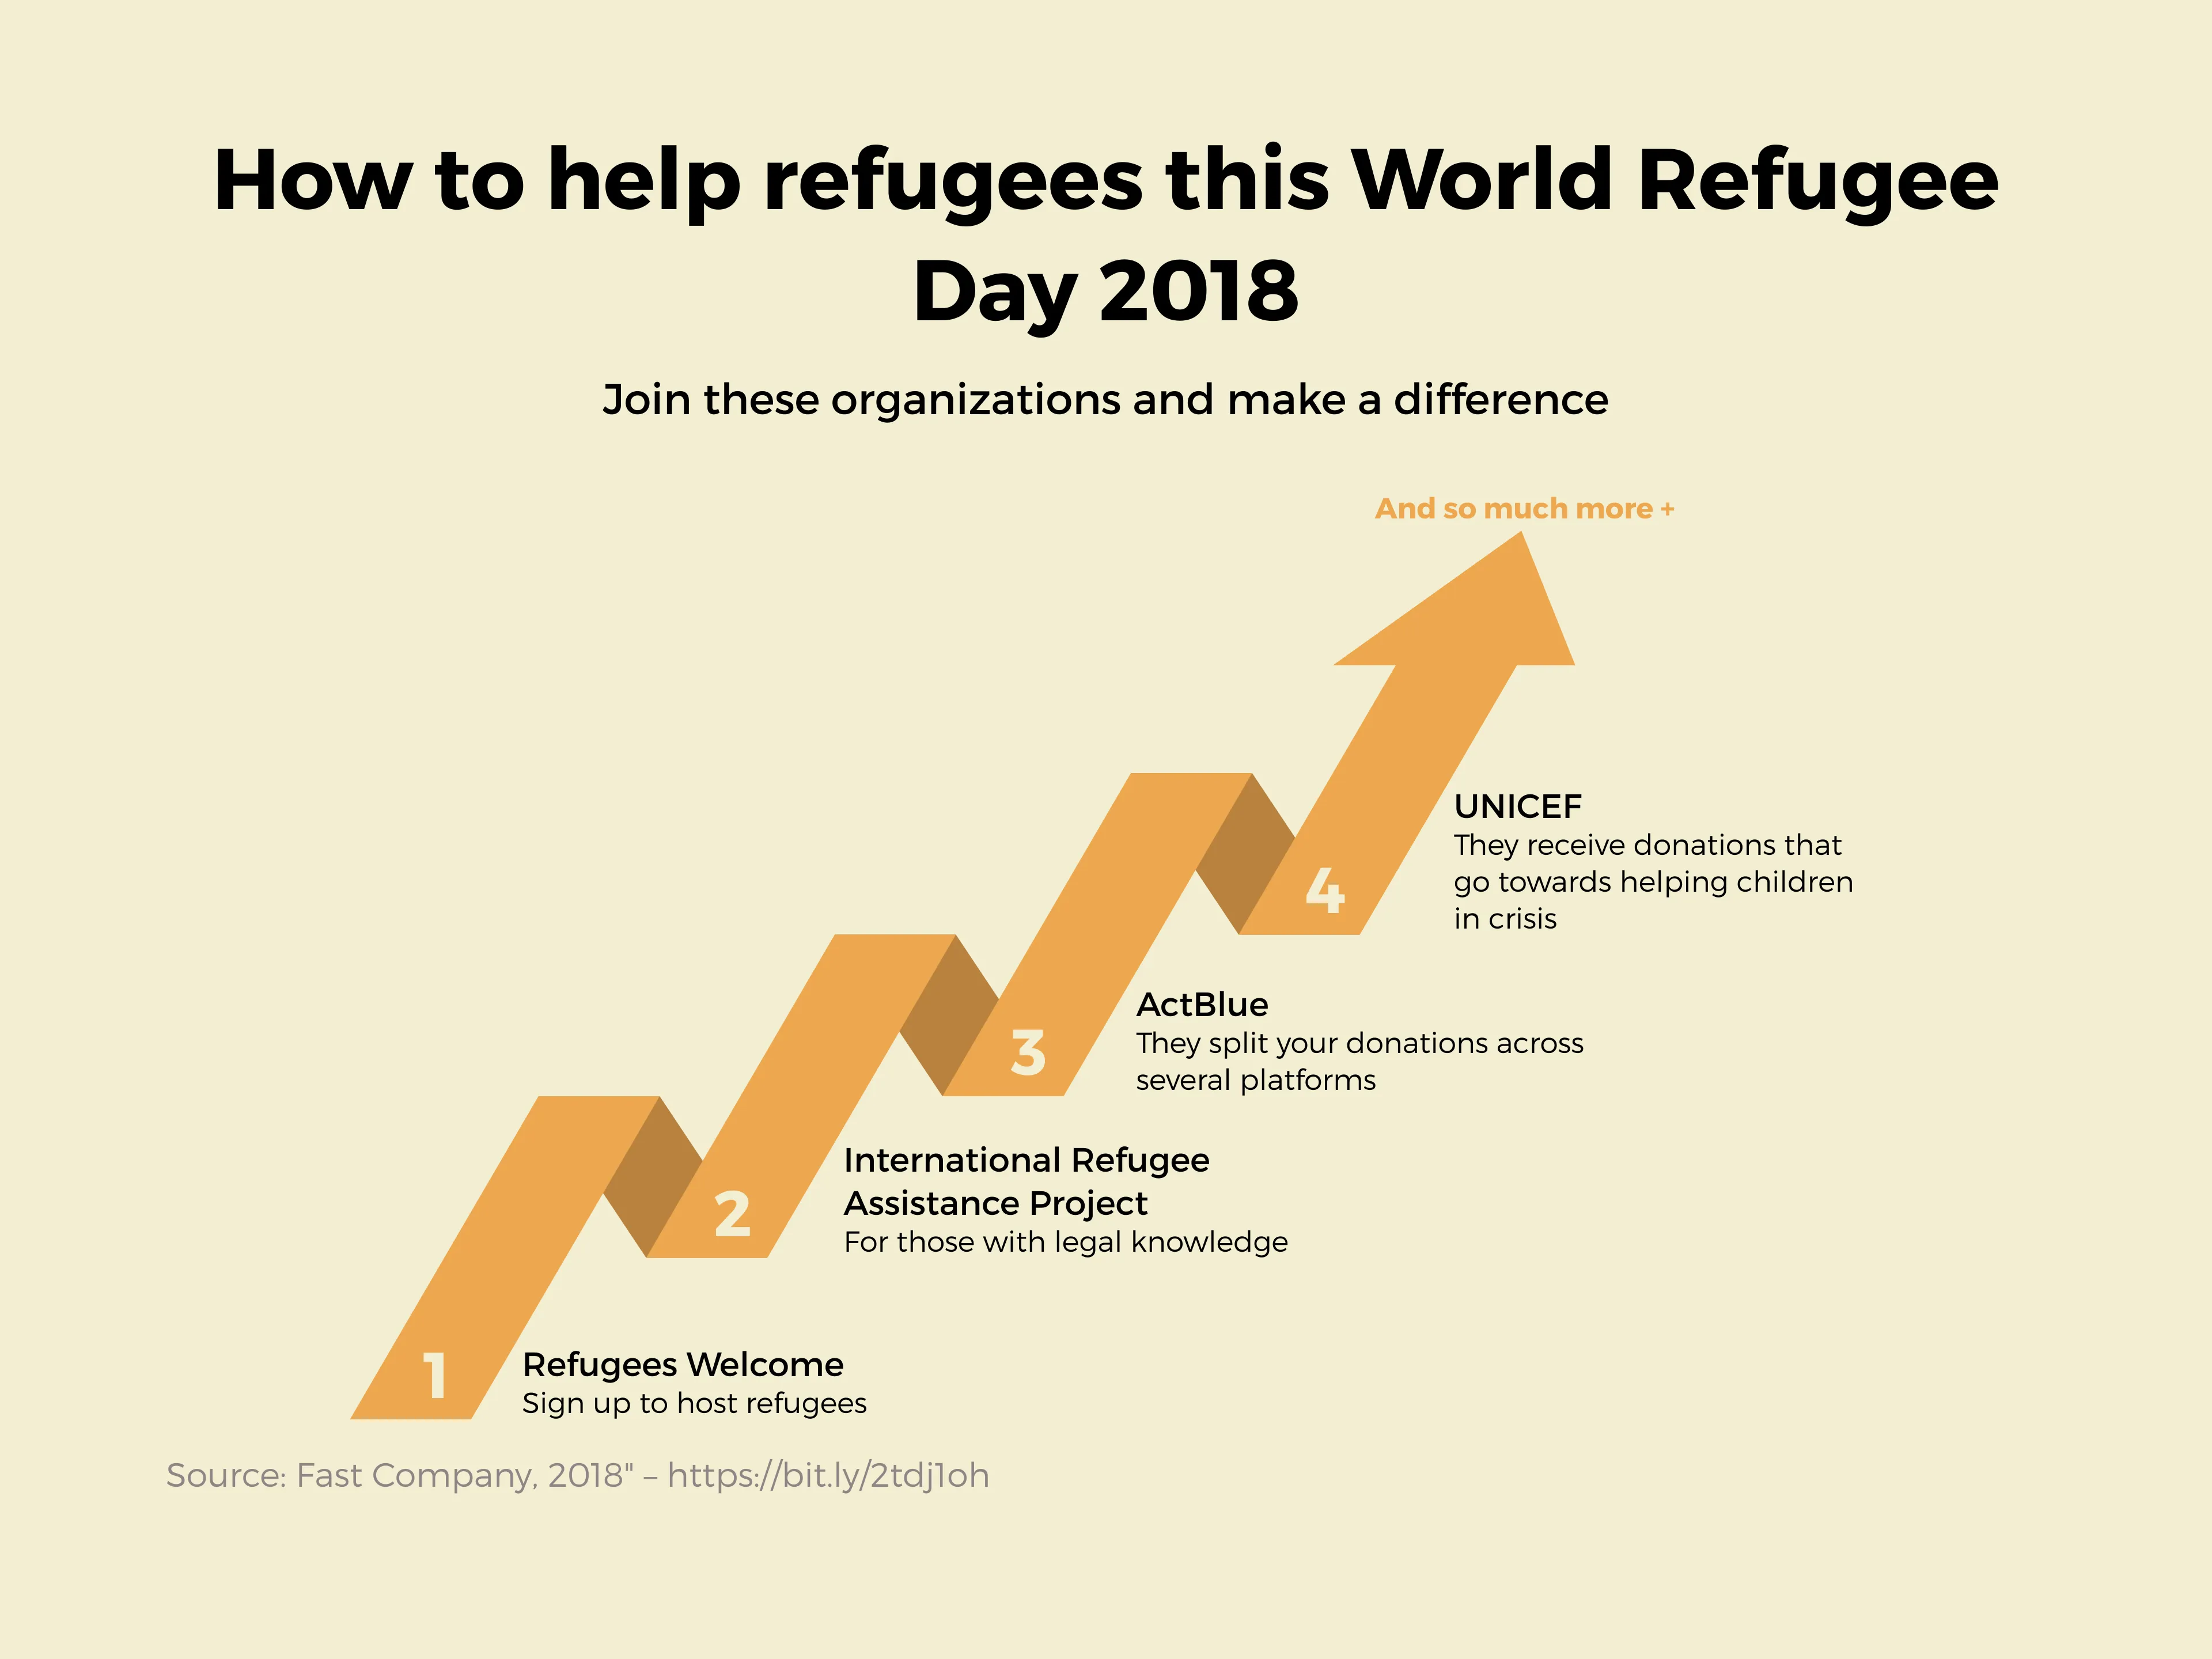 How to help refugees this World Refugee Day 2018